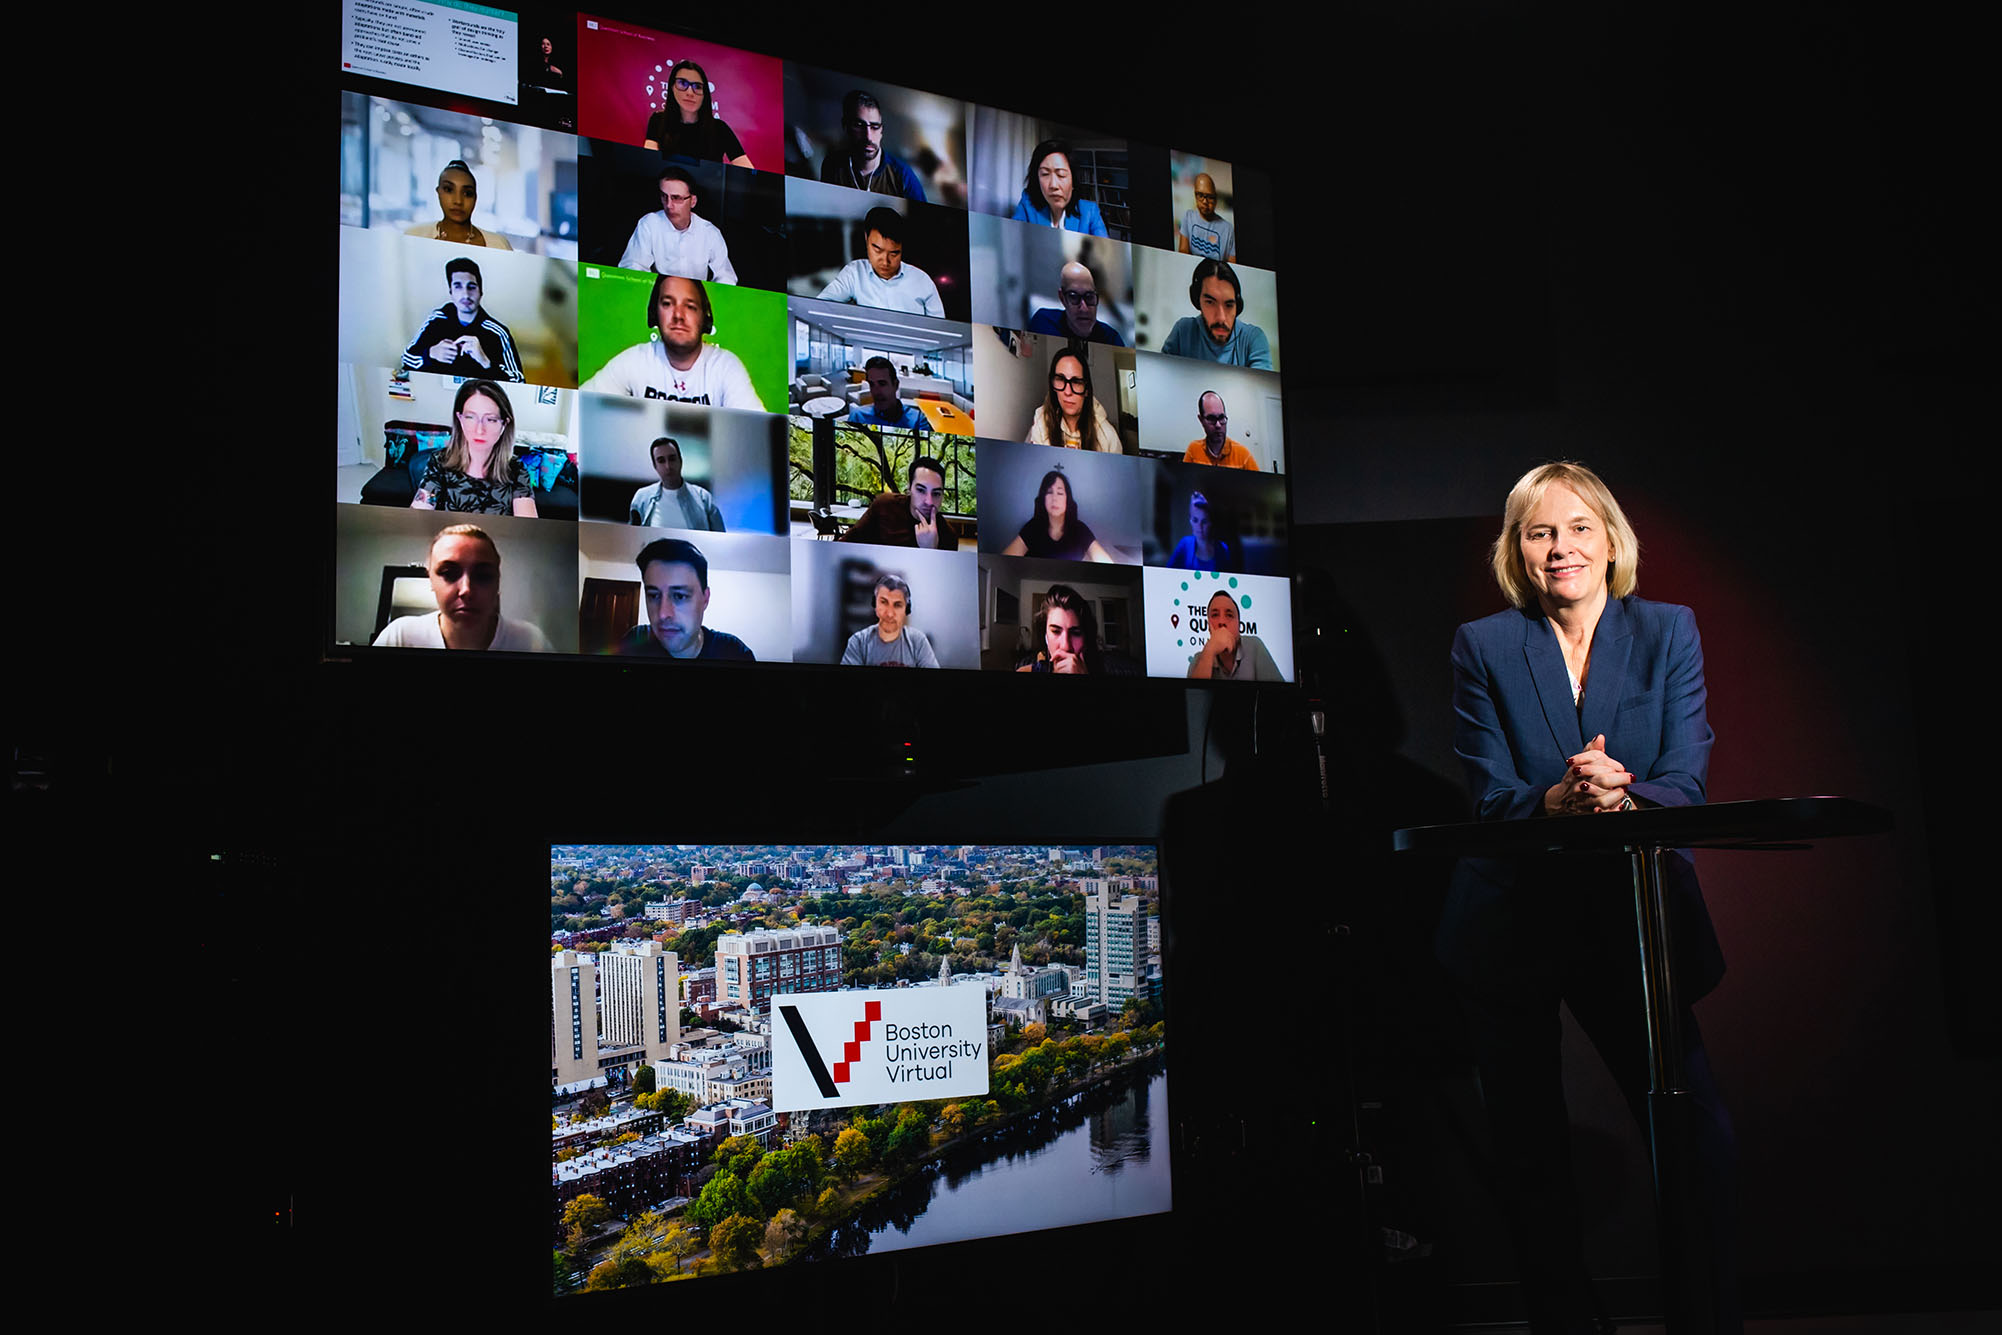 Photo: Wendy Colby, BU's first vice president and associate provost for BU Virtual, poses for a photo in a Questrom online studio. A white woman with shoulder length blonde hair and wearing a navy suit ensemble sits in a chair with hands folded over crossed legs. She sits in a dark room lit with purple backlights as two large monitors are shown to her left. The top displays a grid of students Zooming in viewing webcams and bottom displays the Boston University Virtual logo over a stock photo of BU's campus.